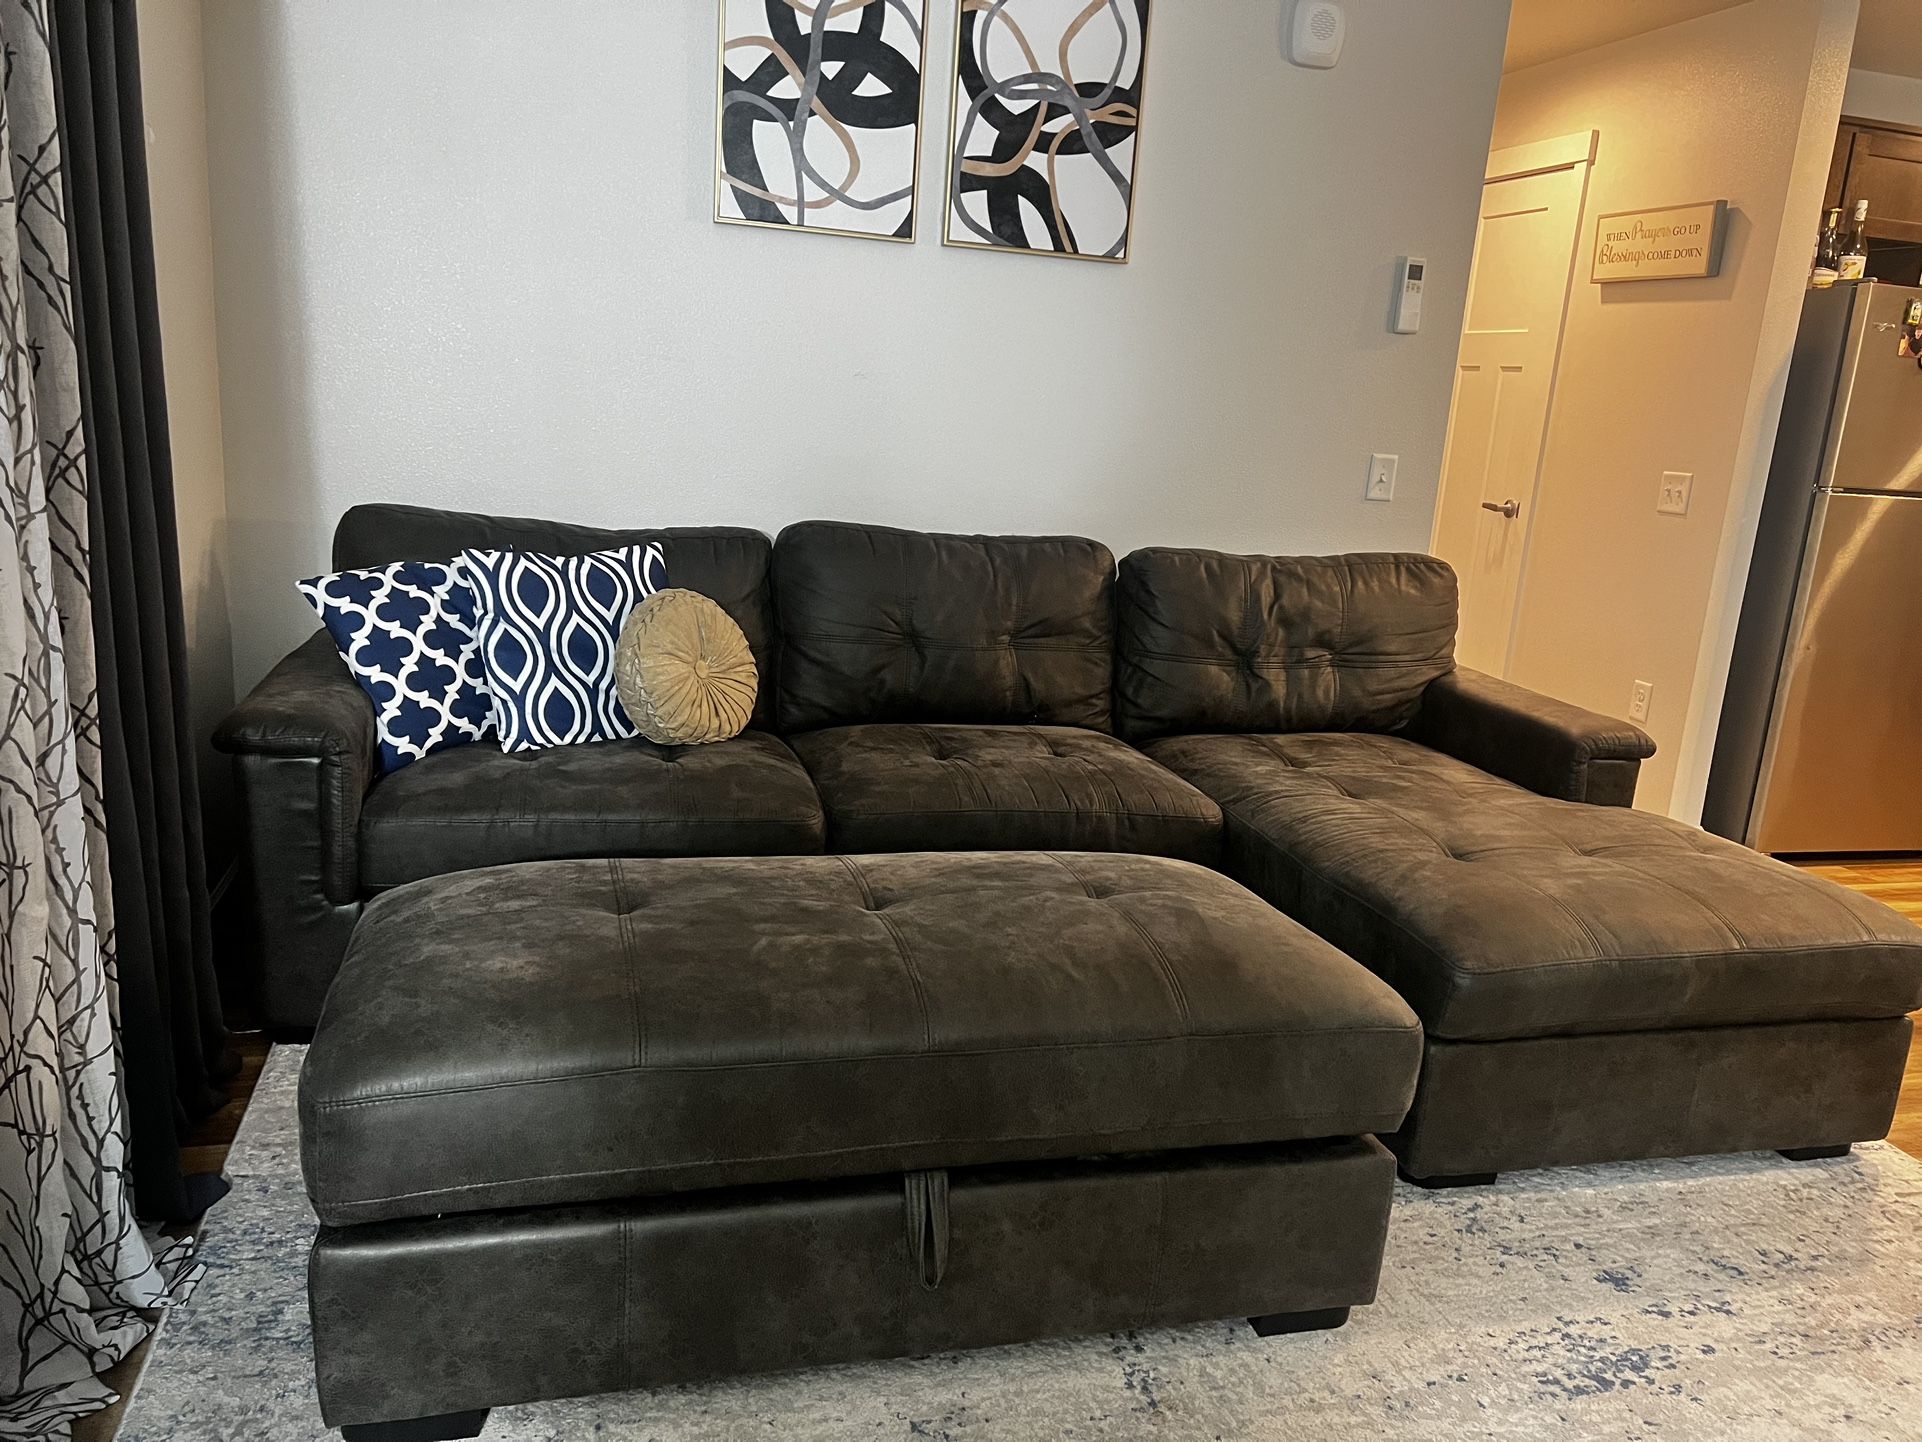 Couch, With Ottoman And Recliner 